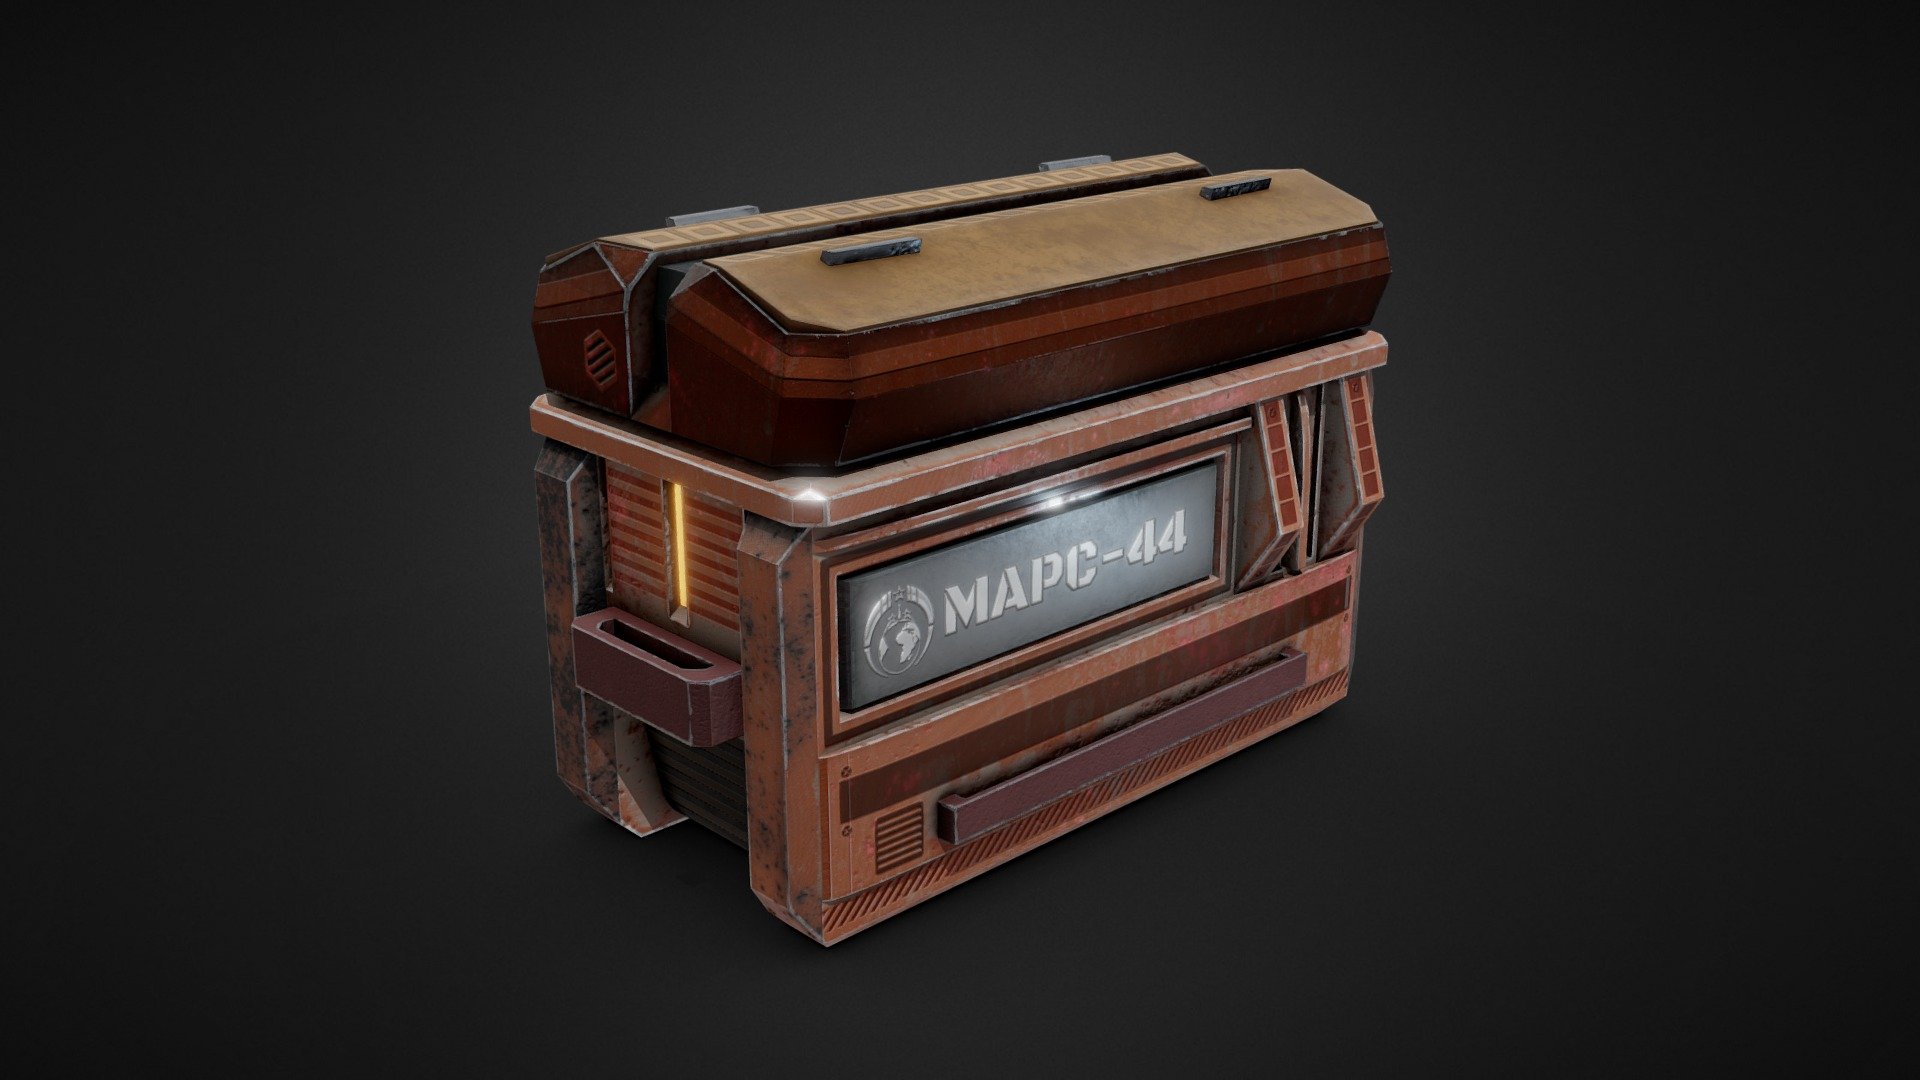 3D model of GAME READY Sci-Fi Prop box, inspired by Mass Effect.
The model was made with a texture resolution of 4096x4096.

1) THE MODEL CONSISTS OF:




479 Polys;

1168 Tris;

1130 Edges;

644 Verts;

4K Textures (AlbedoM, NormalM, RoughnessM, MetalM, IOR-M);

2) FILE PROPERTIES:




Version: 2007 (Only .DXF), 2011 (.FBX and .DWG), 2013;

Render: V-Ray 5.00;

Formats: Max 2013, 3DS, FBX, OBJ (.MTL), ABC, DAE, DWG, DXF;

3) ADDITIONAL INFORMATION:

Software used:




3D modeling: 3ds Max 2016;

UV Mapping: 3ds Max 2016;

Painting / Texturing: Substance Painter &amp; Photoshop;

My system specifications:




CPU: Intel Core i7 4770k 3.5GHz;

GPU: GeForce GTX 760 2GB;

RAM: DDR3 8GB;

OS: Windows 10;

In the zip file you will find the textures for the model.
Whole scene setuped and fully ready to render in Vray. All materials setuped in Vray.
I wish you happiness and health! - C3 - Sci-Fi Container 4 - 3D model by jordnu 3d model